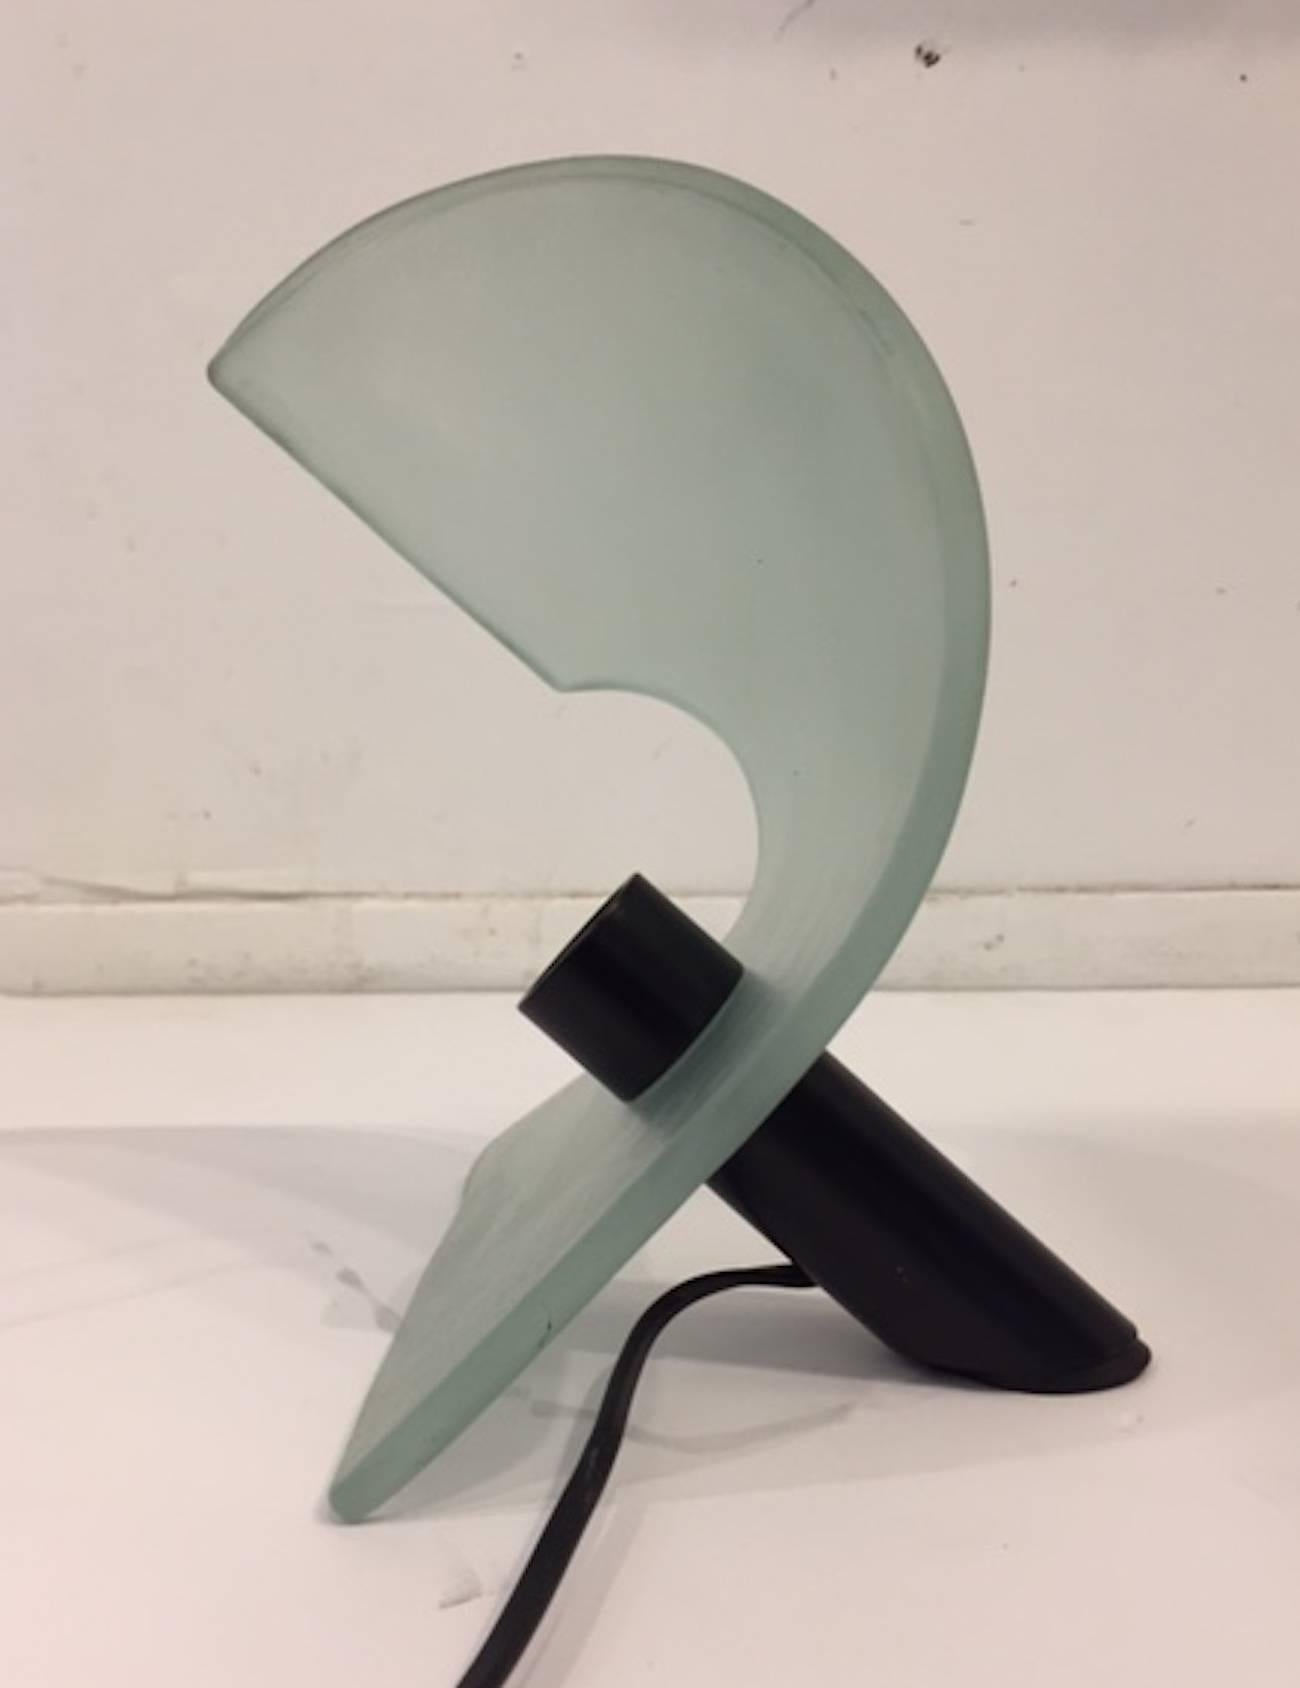 A beautifully minimal design and sculptural petite table lamp by well know Italian lighting house De Majo of Murano, circa 1980, the lamp consists of a satin finish glass panel that curls around and over the light bulb. The shade is supported on end